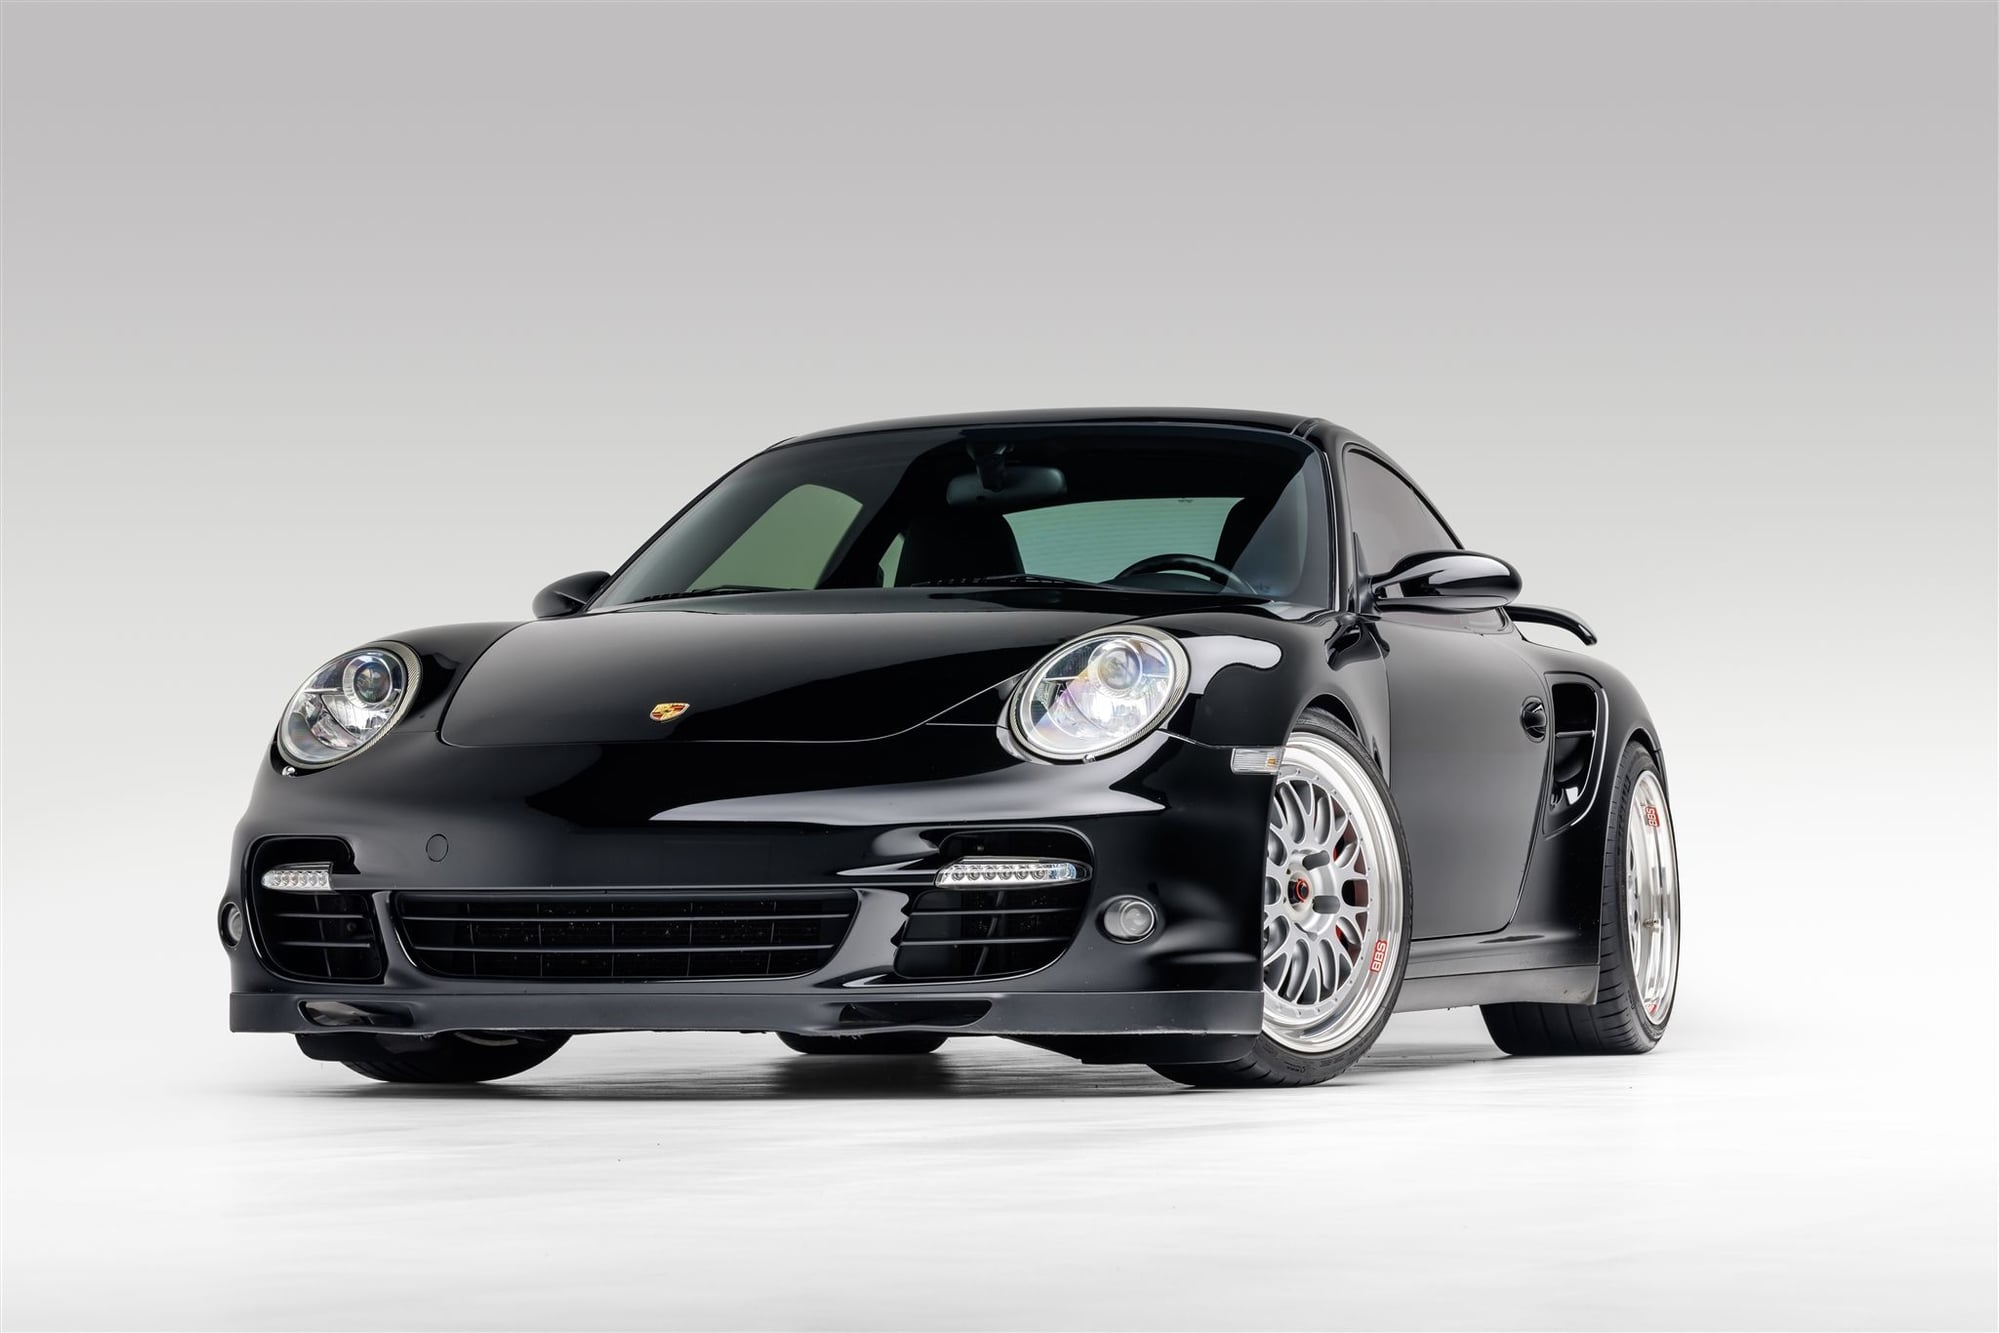 2008 Porsche 911 - 2008 Porsche 911 Turbo 6 Speed Manual 6MT 74K Tastefully Top Shelf Modified - Used - VIN WP0AD299X8S783334 - 73,700 Miles - 6 cyl - AWD - Manual - Coupe - Black - Irvine, CA 92602, United States